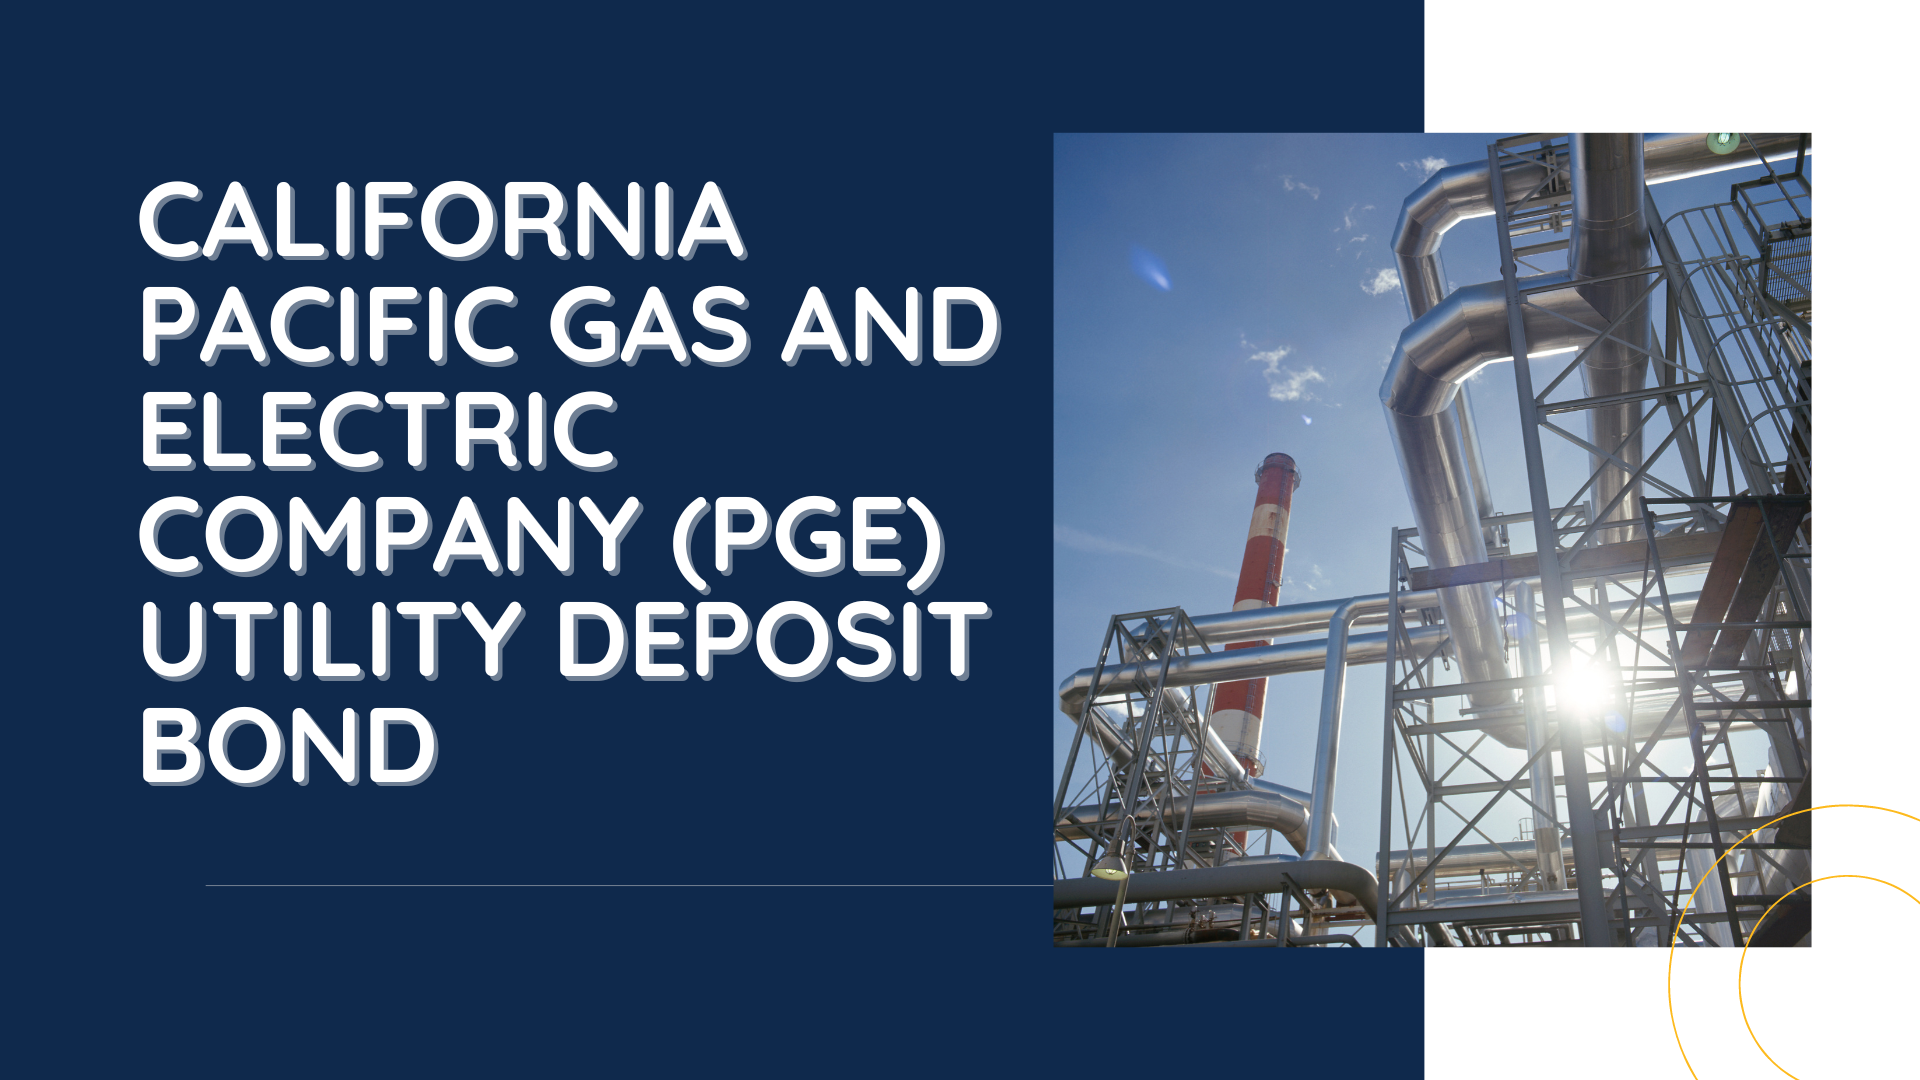 Surety Bond-California Pacific Gas and Electric Company (PGE) Utility Deposit Bond